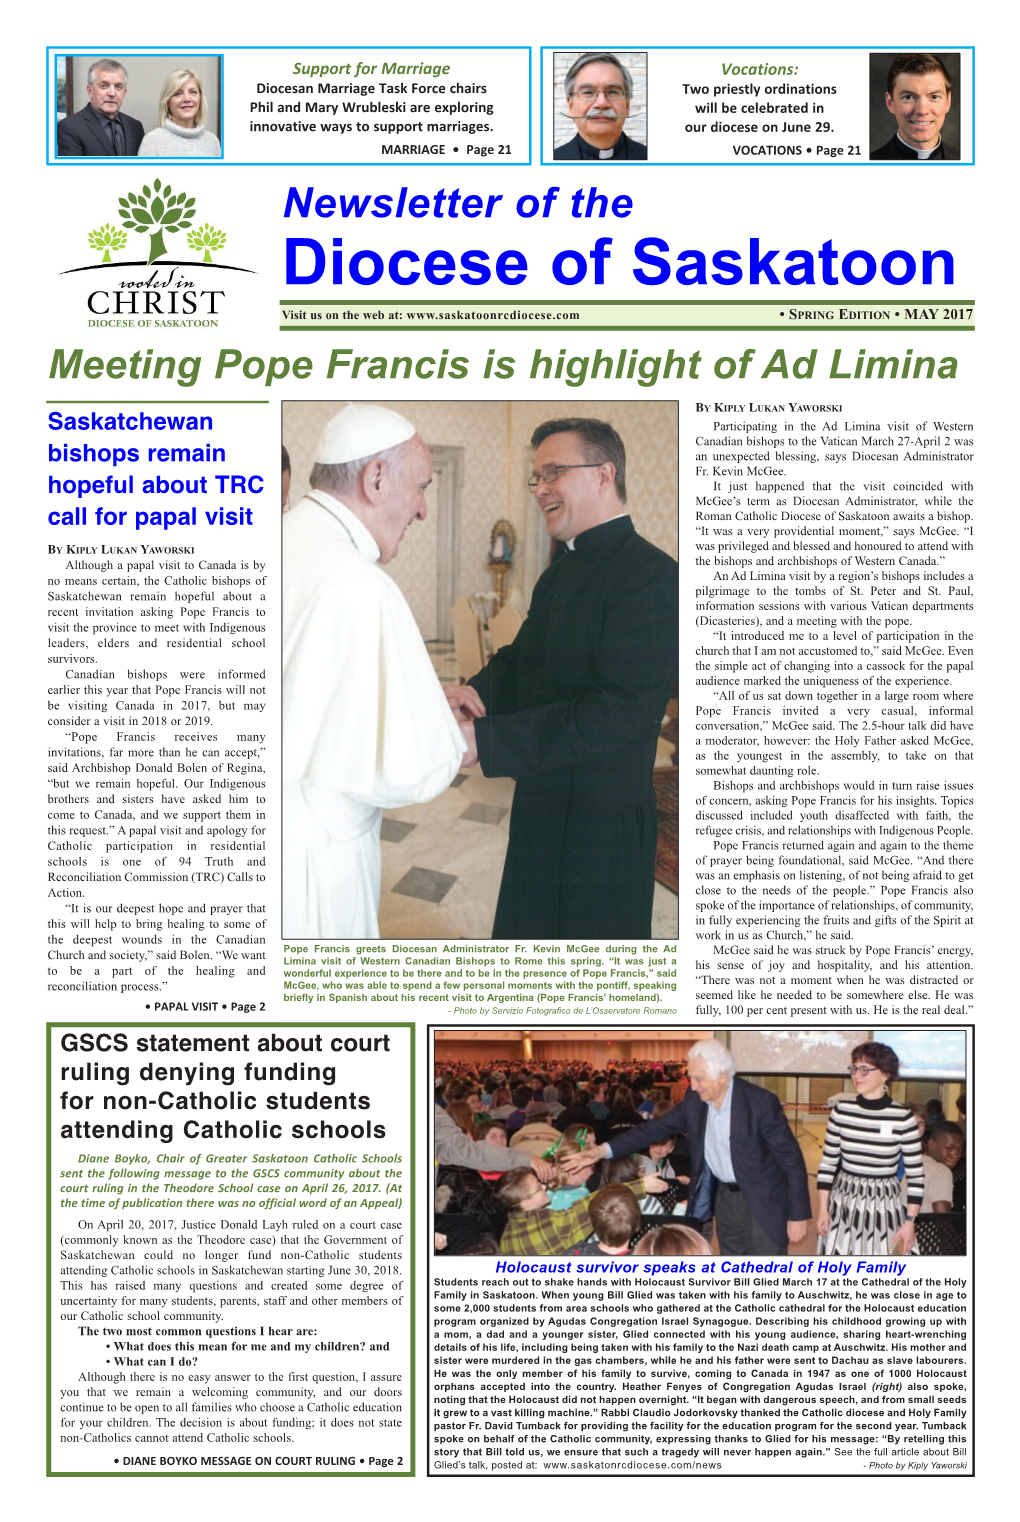 Diocesan Newsletter) , Addressed to Our Brothers and Sisters in Faith and All People Who Have the Gift Necessary Supports, Fear, and Any Number of Other of Life